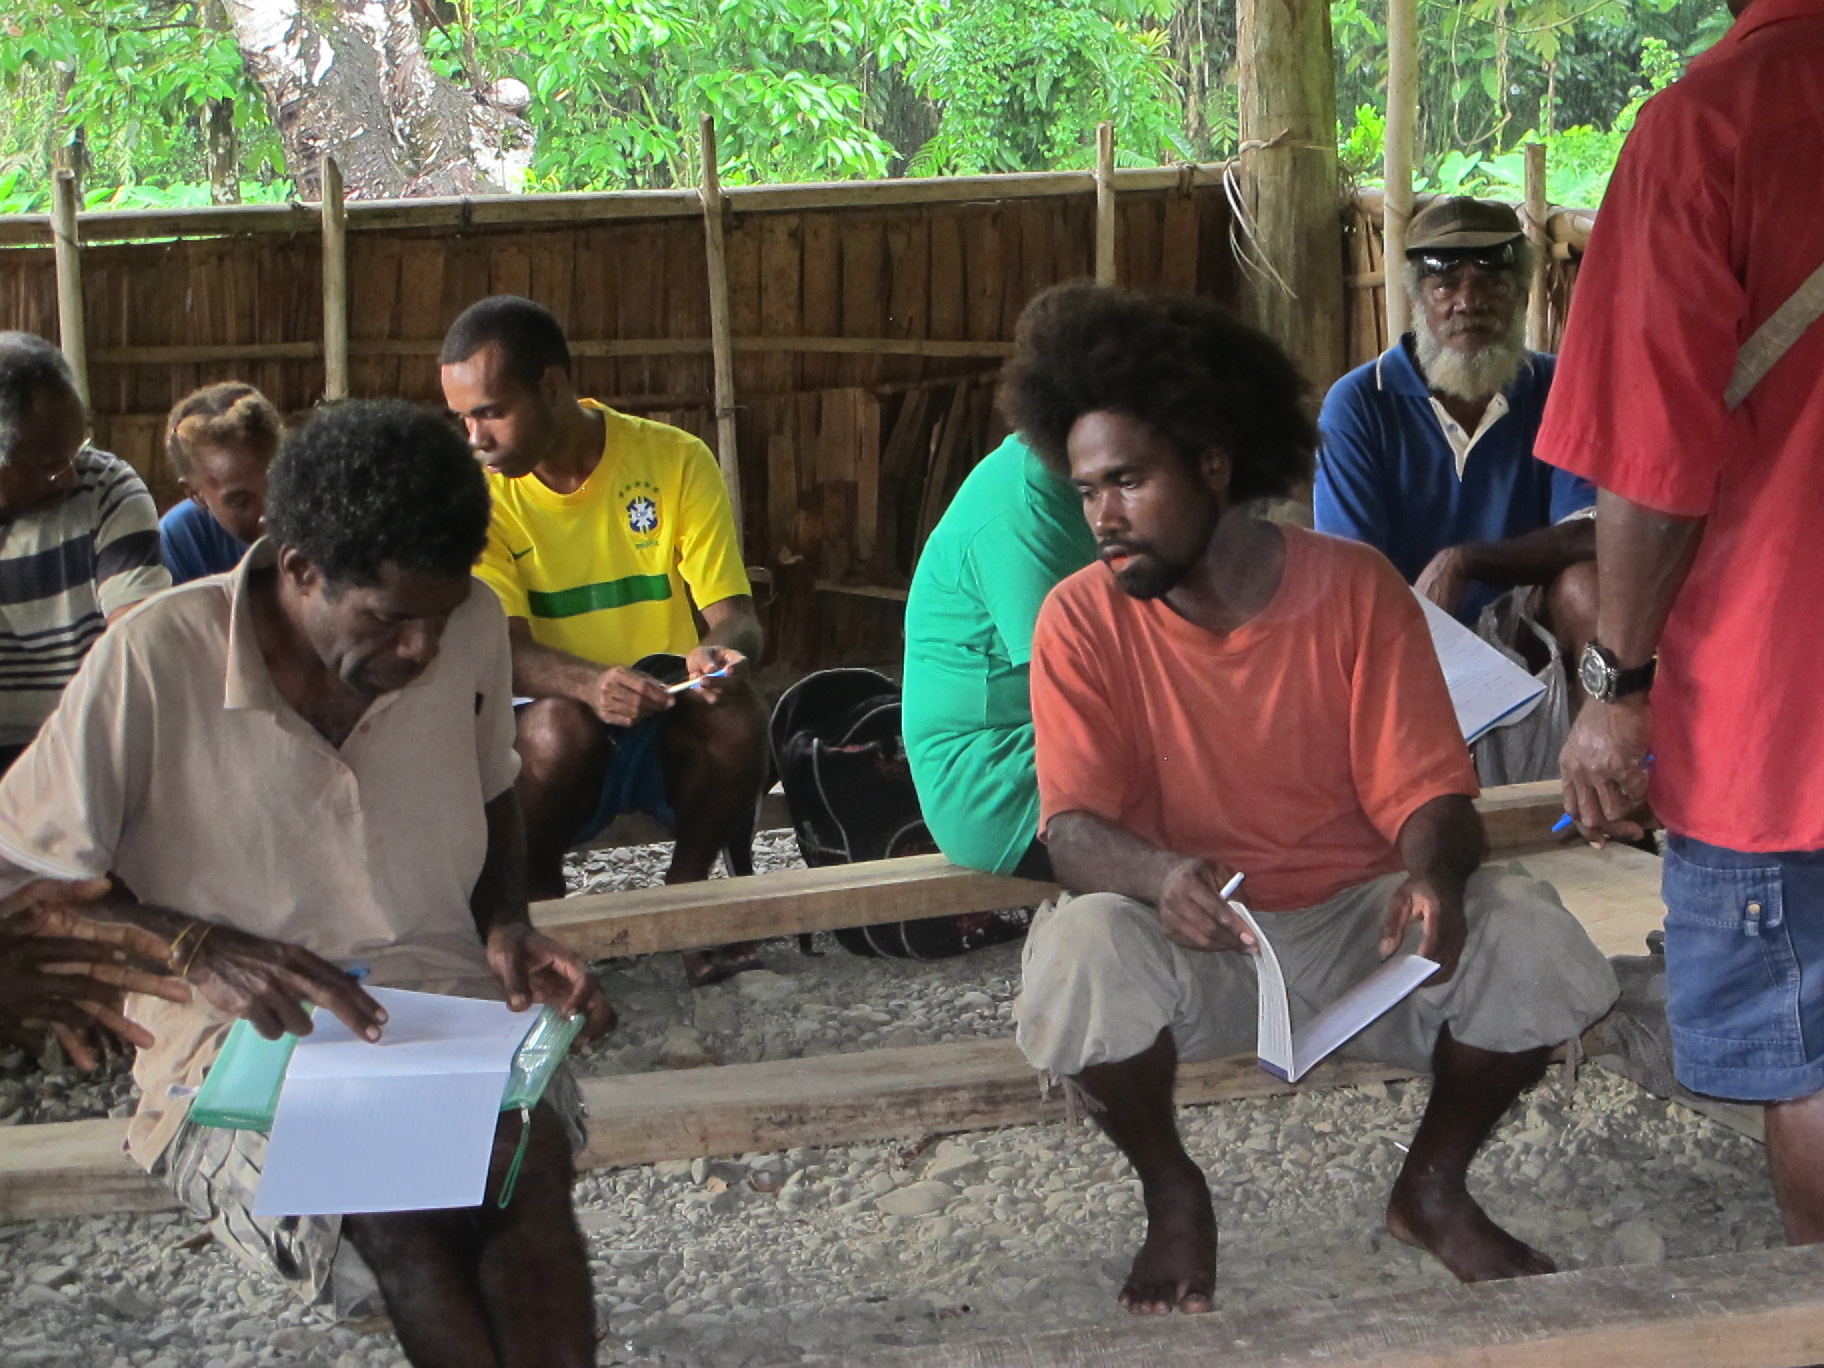 Some of the people taking part in the weaving dictionary workshop (August 2011, Nangali, Longgu Island). At the back from the left there are Ataban Kebu (face not fully visible), Mary Tovoa, John Bosawana, an unknown female and Steward Bungana. At the front from the left there are William Tarauva, Michael Matea and Gabriel Ropovono (standing with back to camera). Landing page image for the collection 